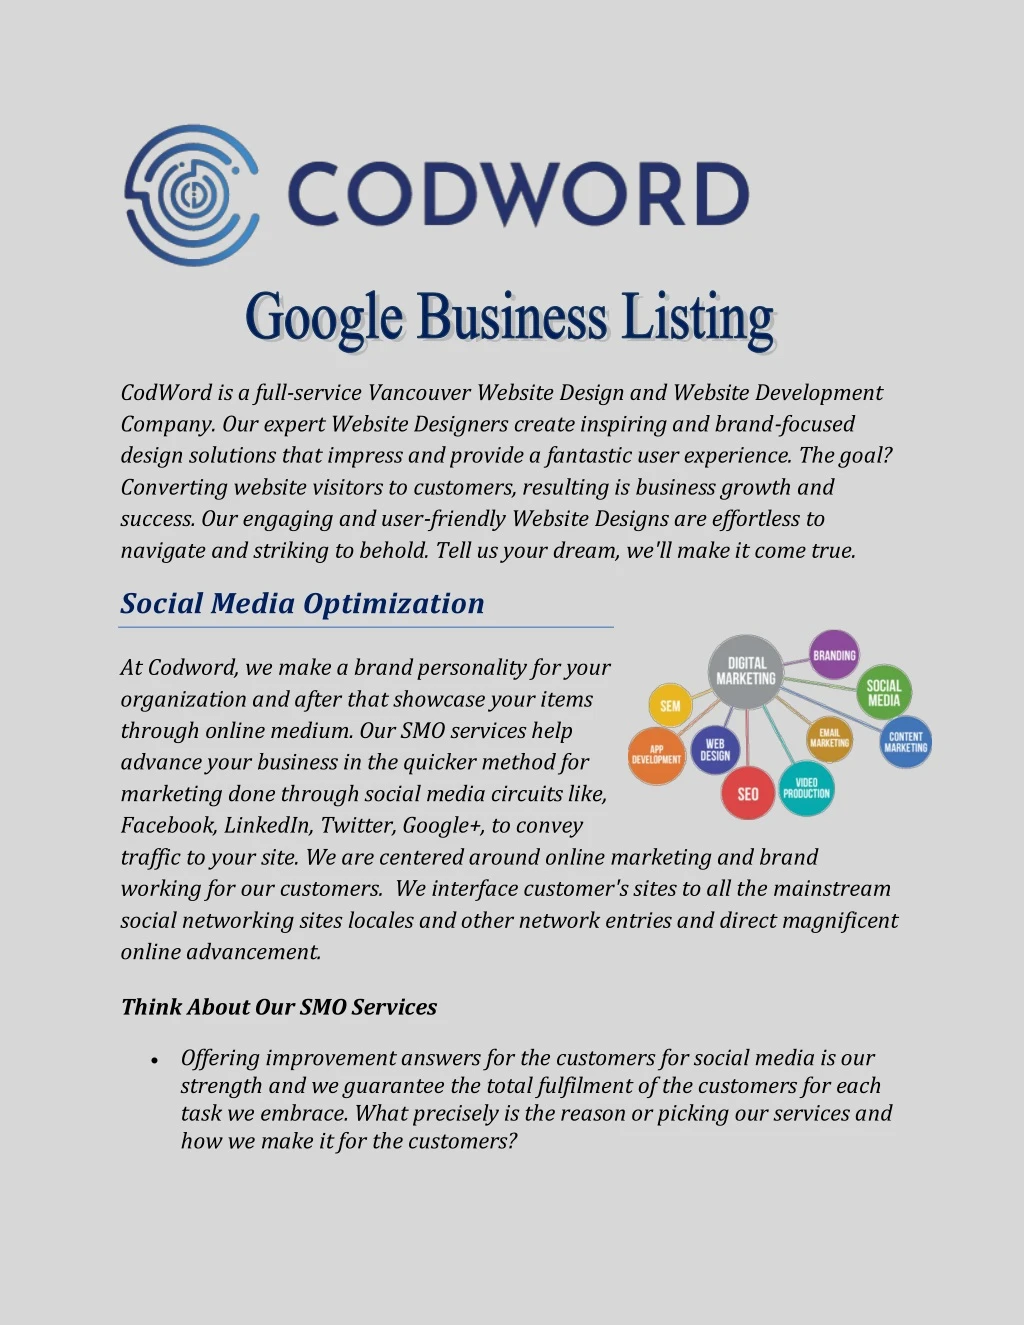 codword is a full service vancouver website